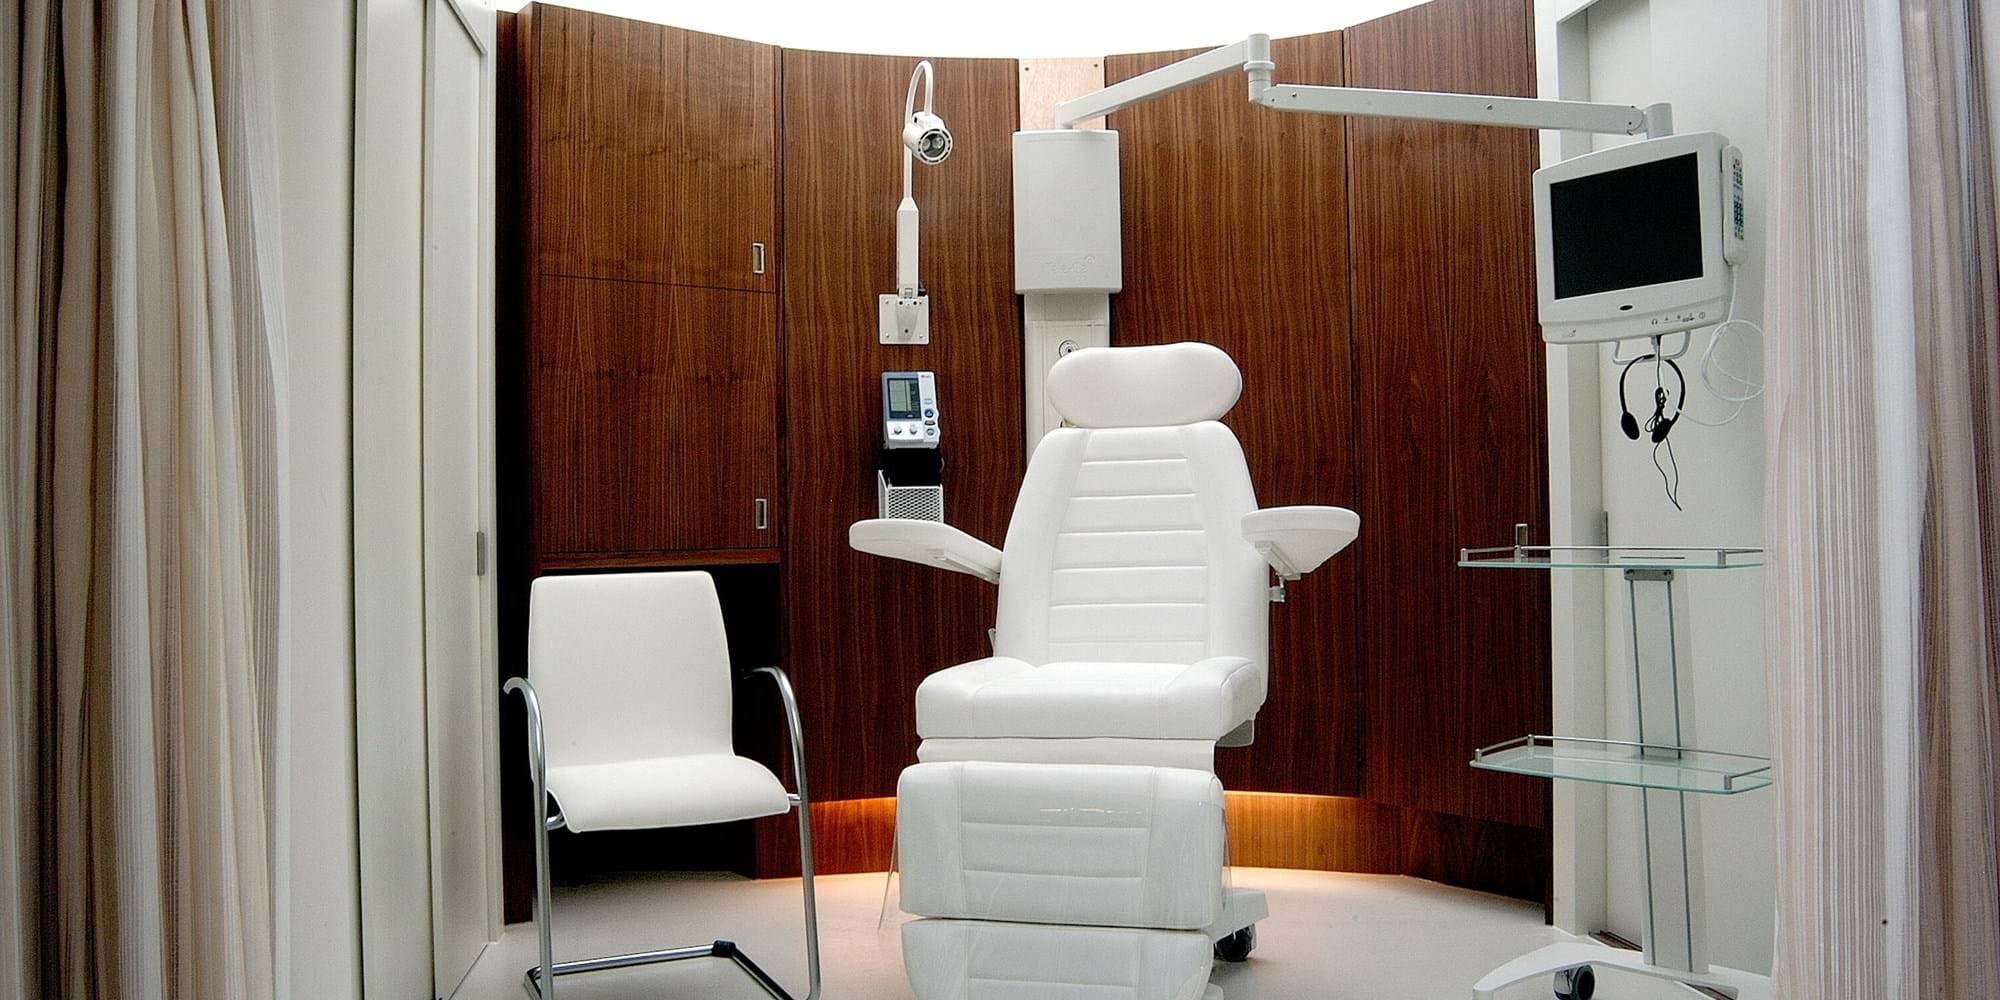 Modus Workspace office design, fit out and refurbishment - Oncology Clinic - Day Chair 2.jpg